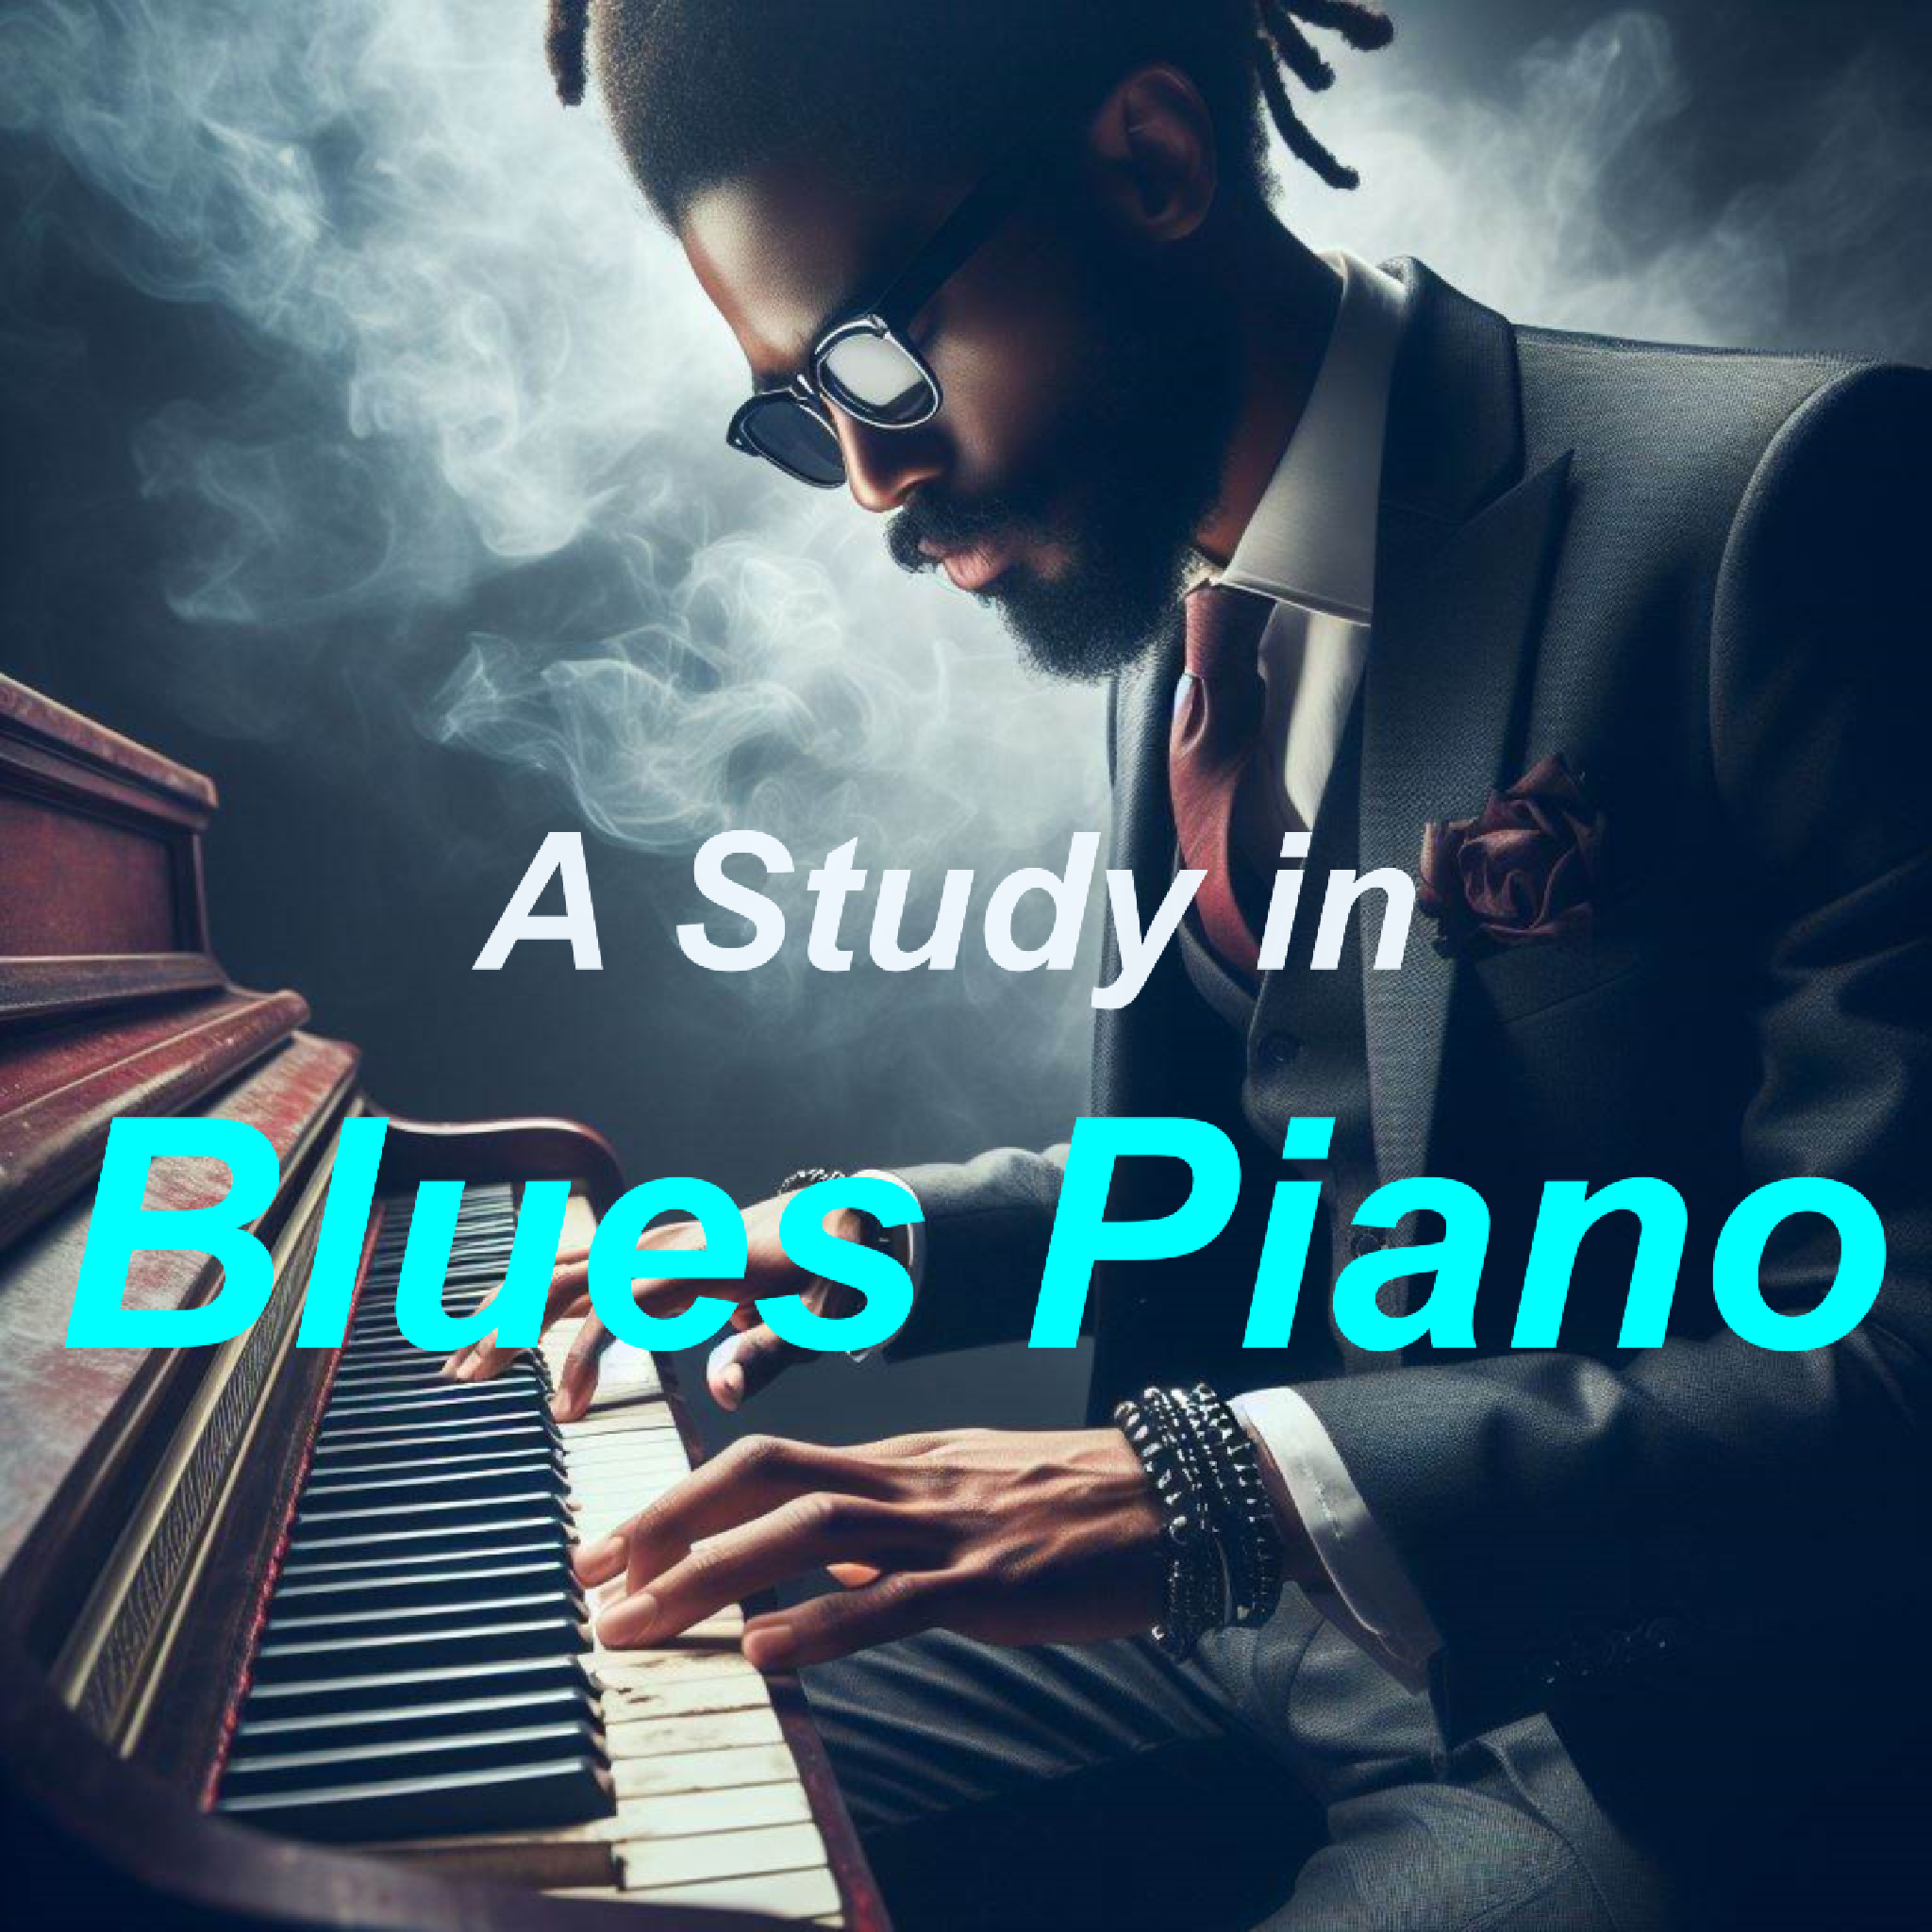 Cover Image for "A Study in Blues Piano" from Piano With Kent. Man wearing sunglasses, playing blues piano, in a smokey room.